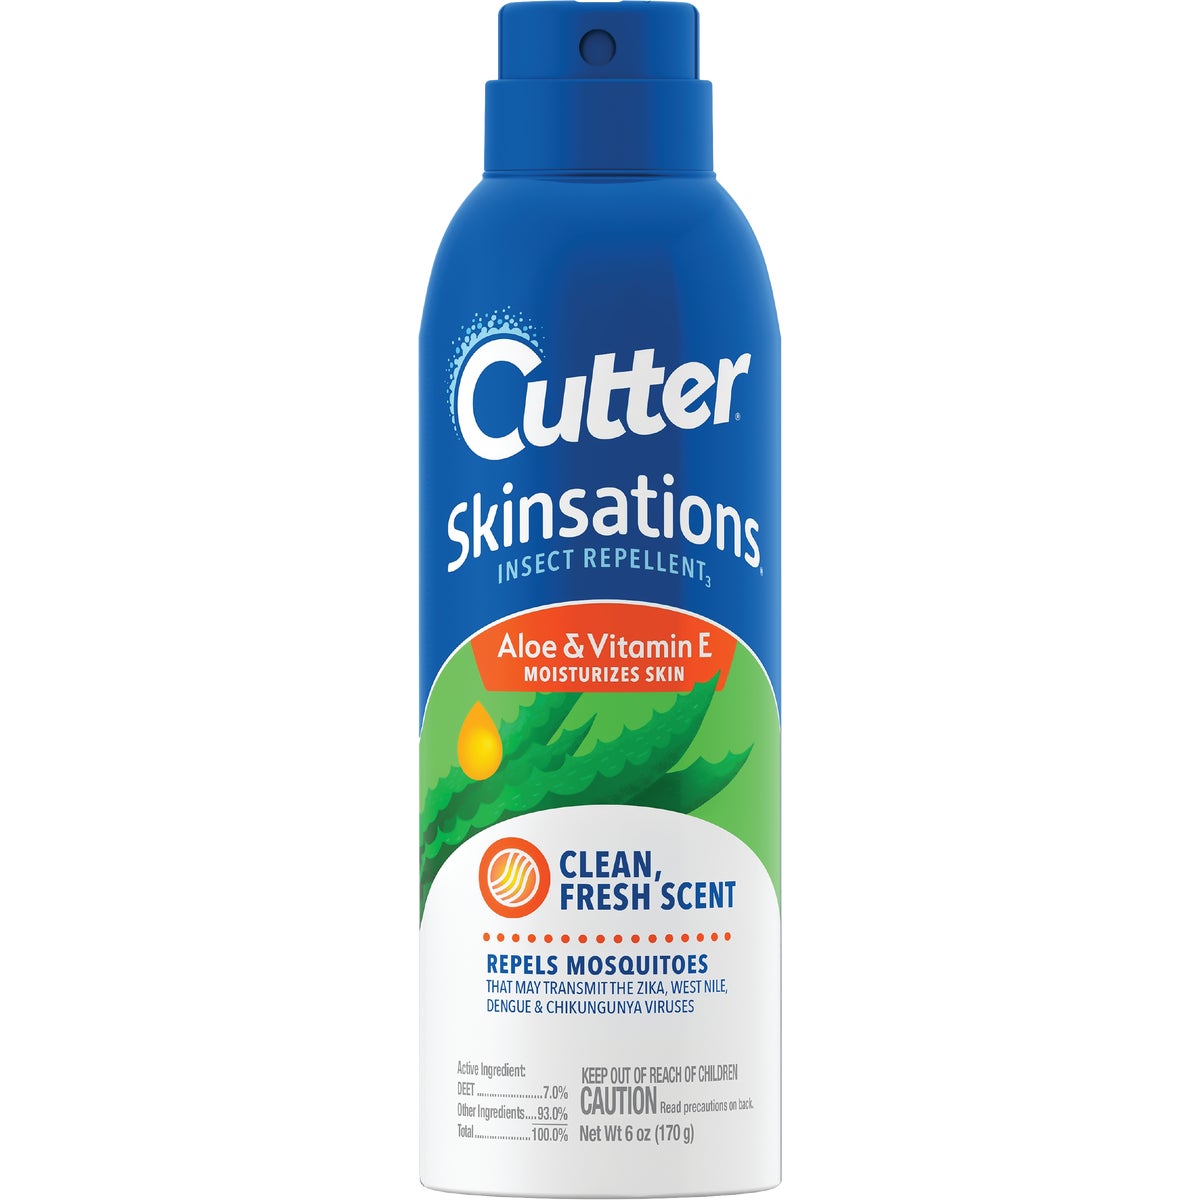 Cutter Skinsations 6 Oz. Insect Repellent Aerosol Spray